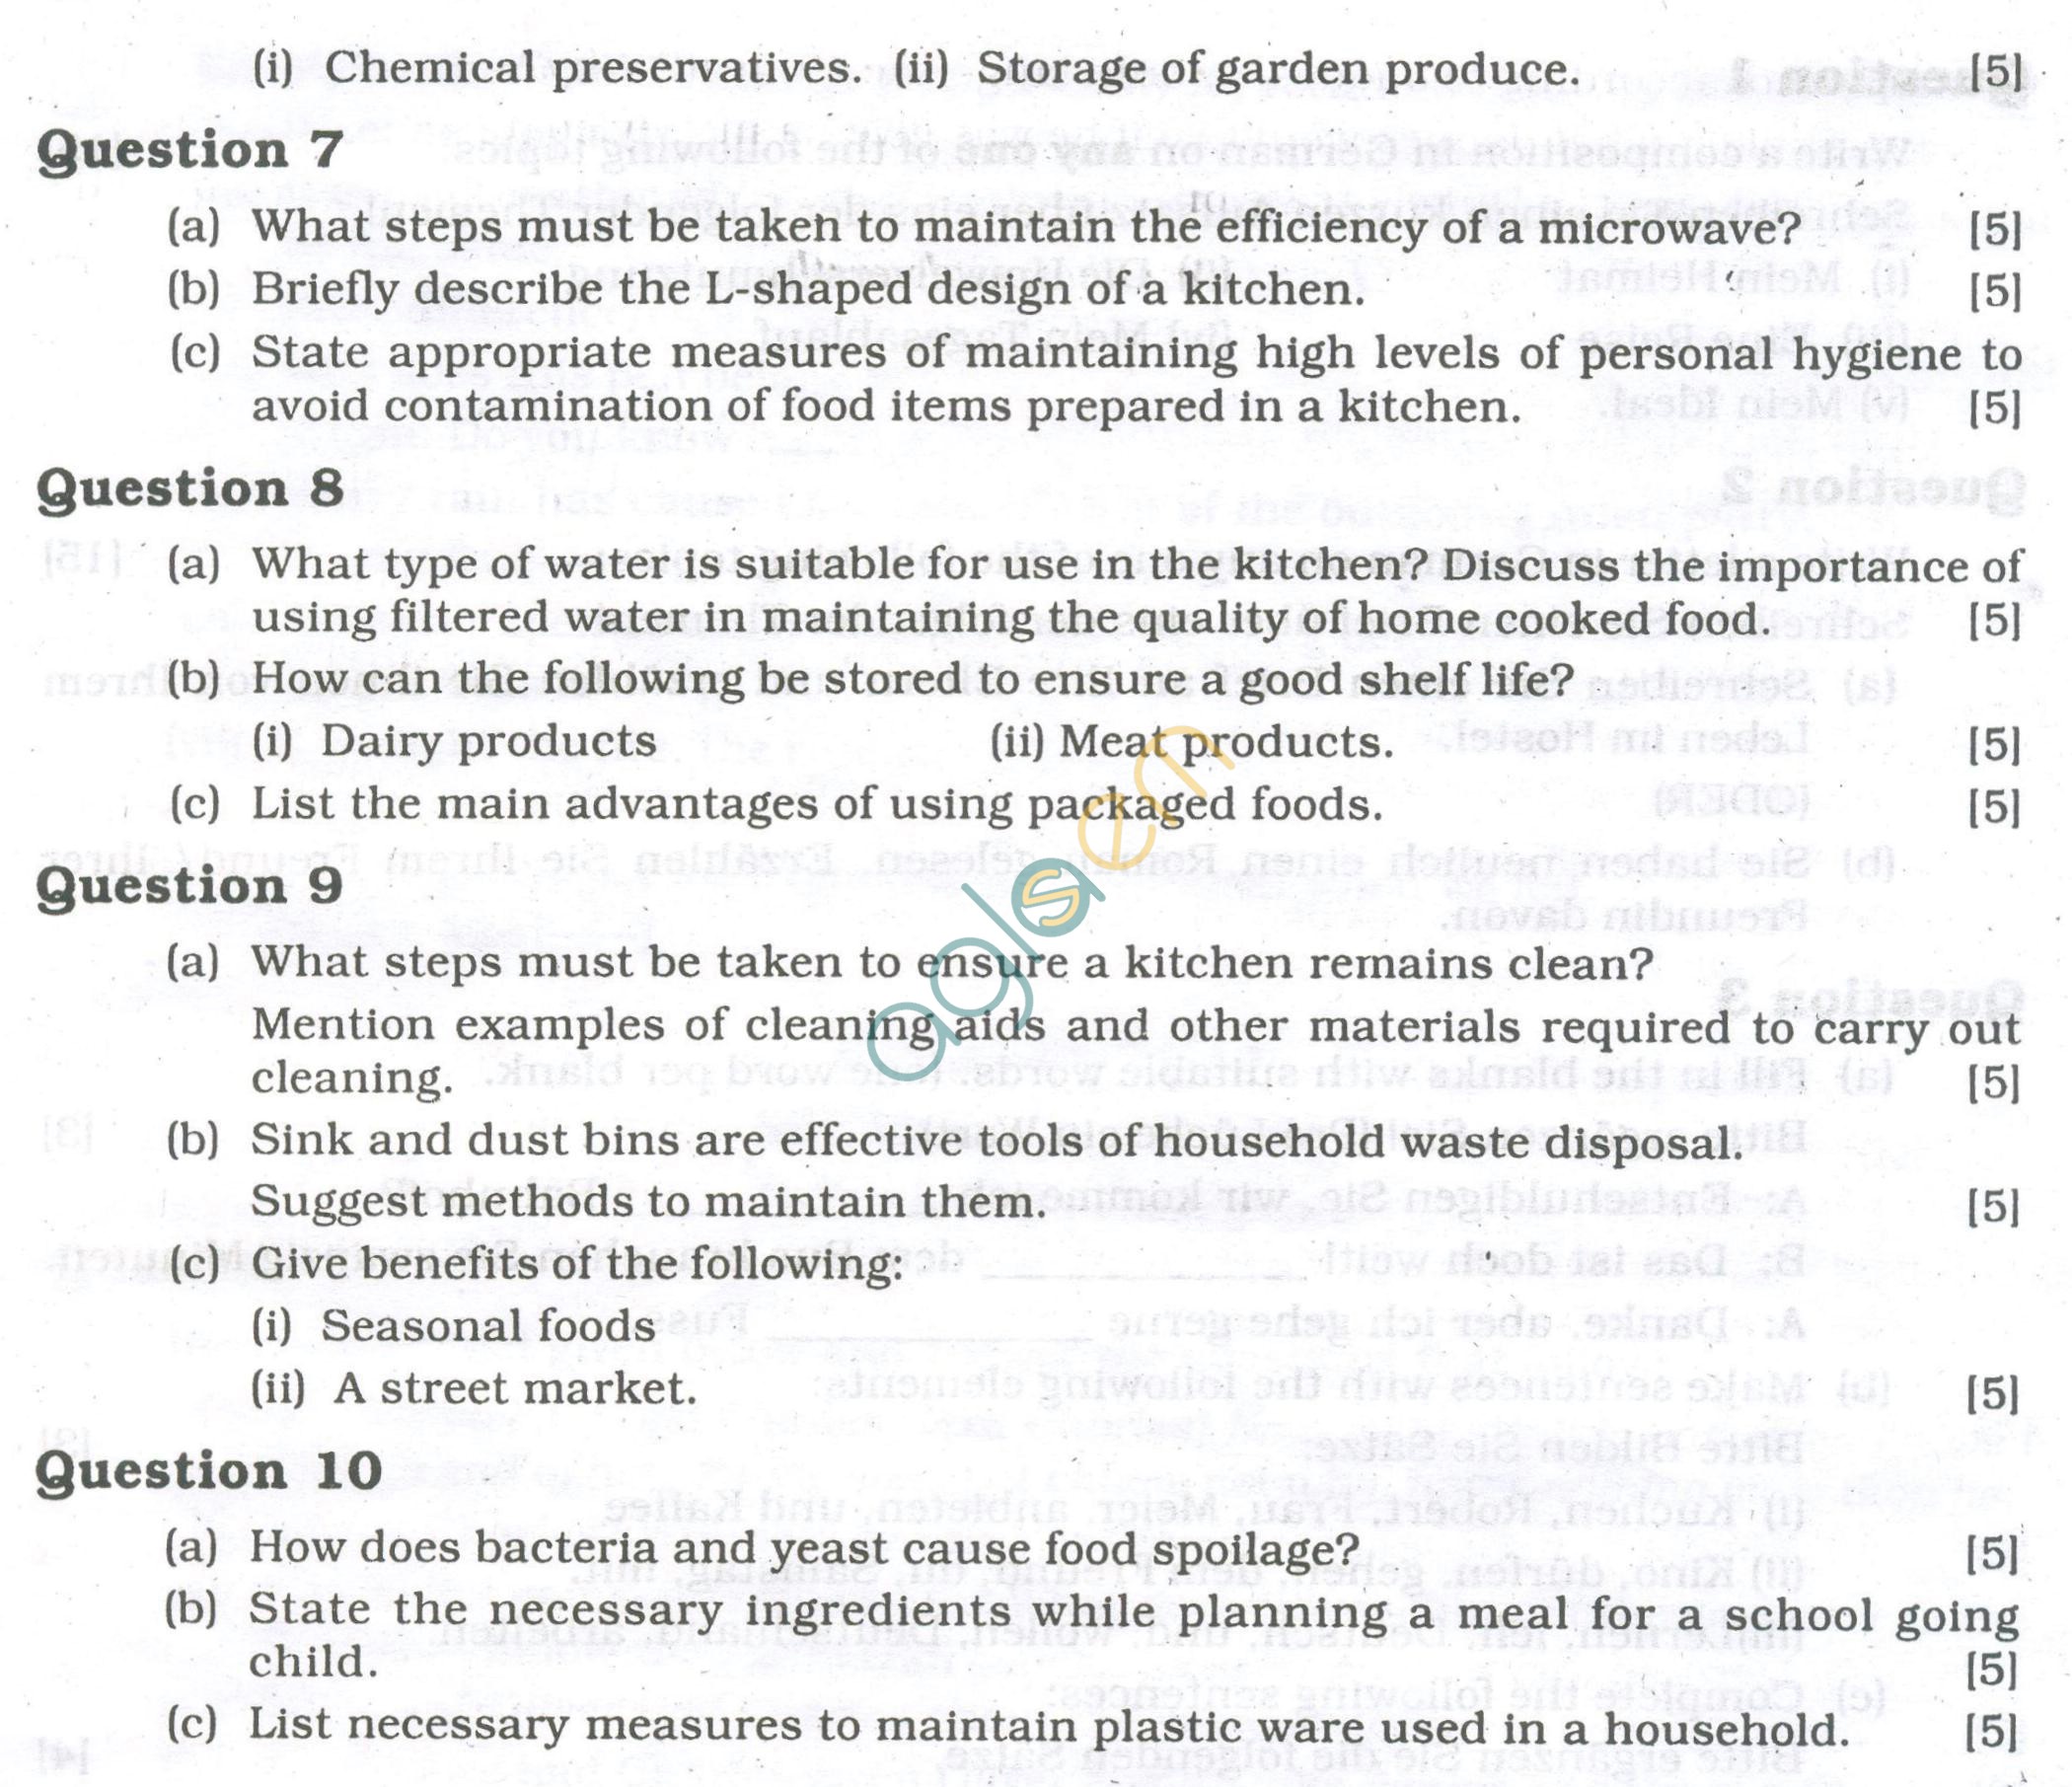 ICSE Question Papers 2013 for Class 10 - Cookery/